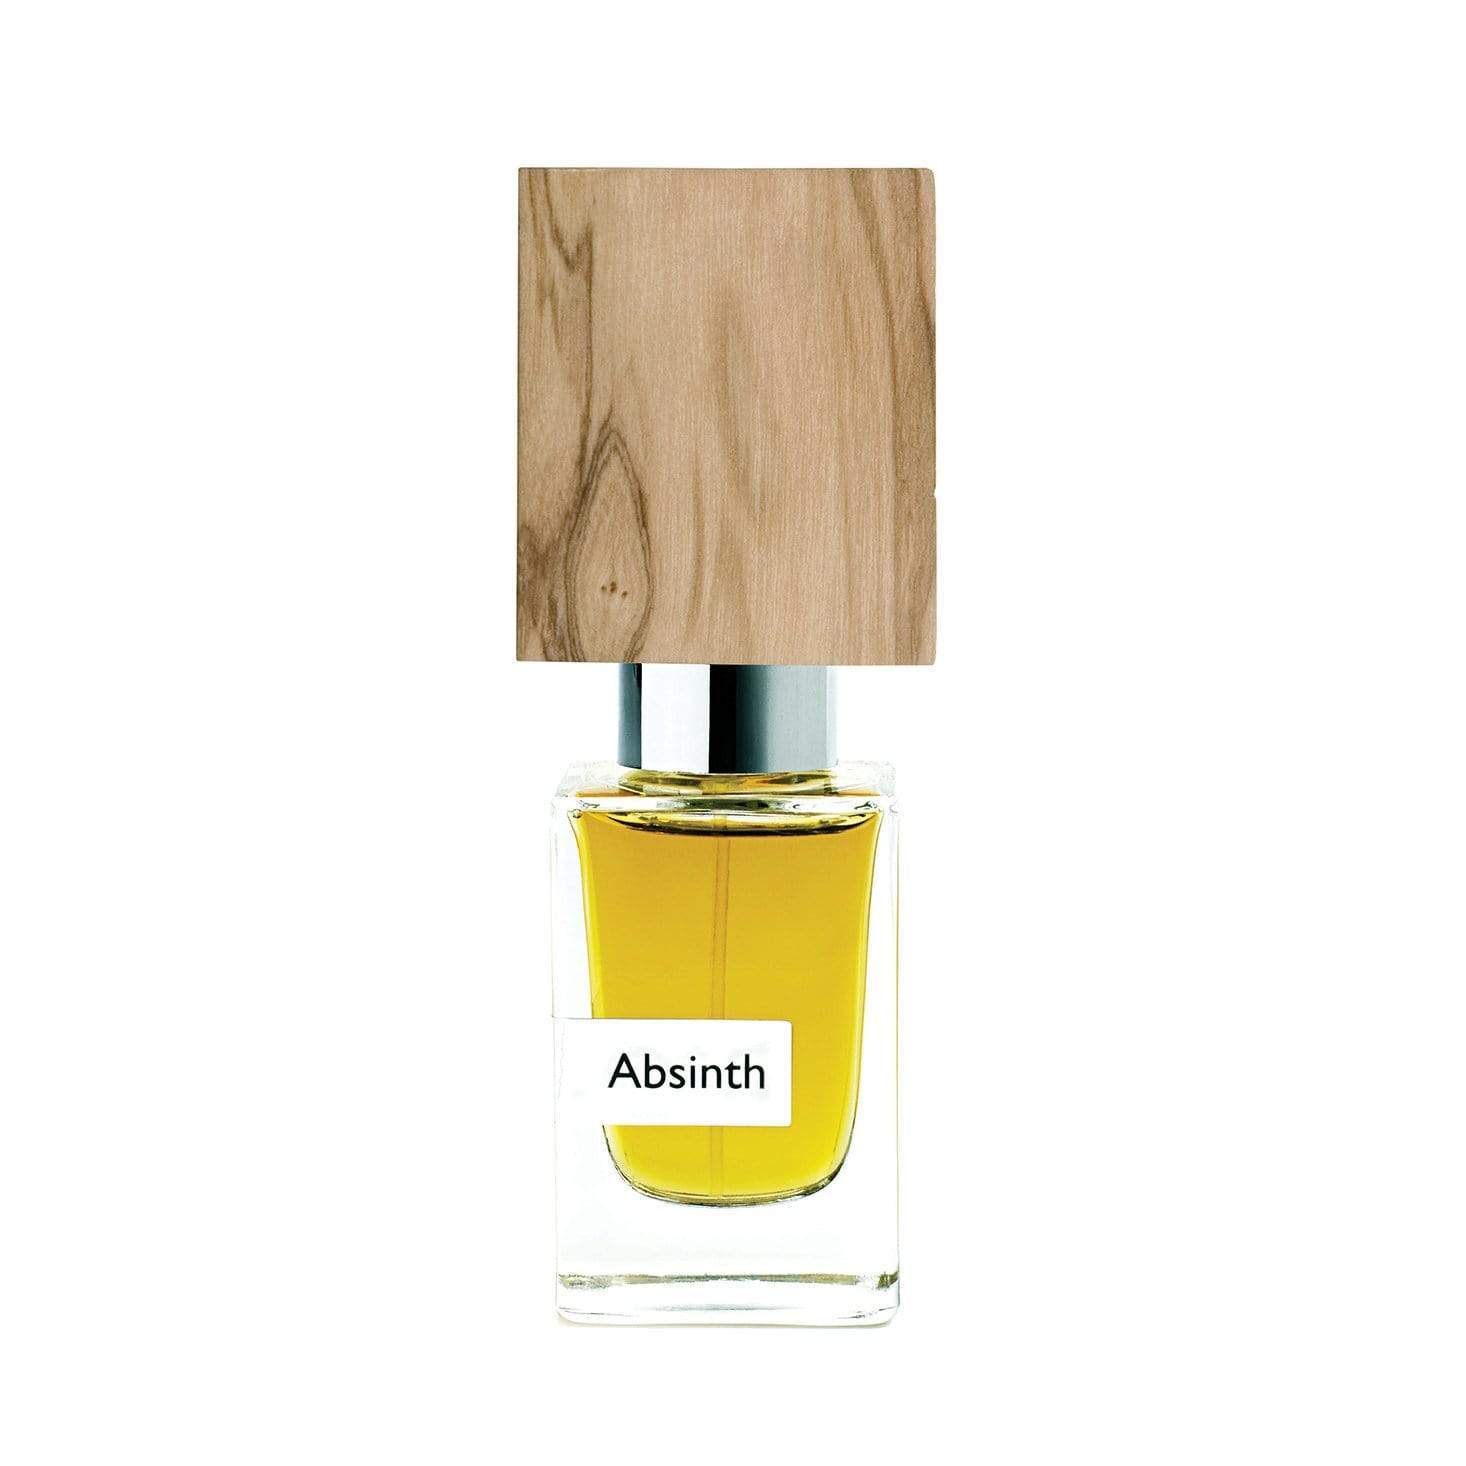 BEON.COM.AU From iconic perfume house Nasomatto, this Parfum Extrait is a magnetic mix of earthy browns and fresh, woody greens. Taking his inspiration from raw materials, situations and nature, with this bitter-sweet fragrance Alessandro Gualtieri has created a perfume that challenges convention and stands ... Nasomatto at BEON.COM.AU